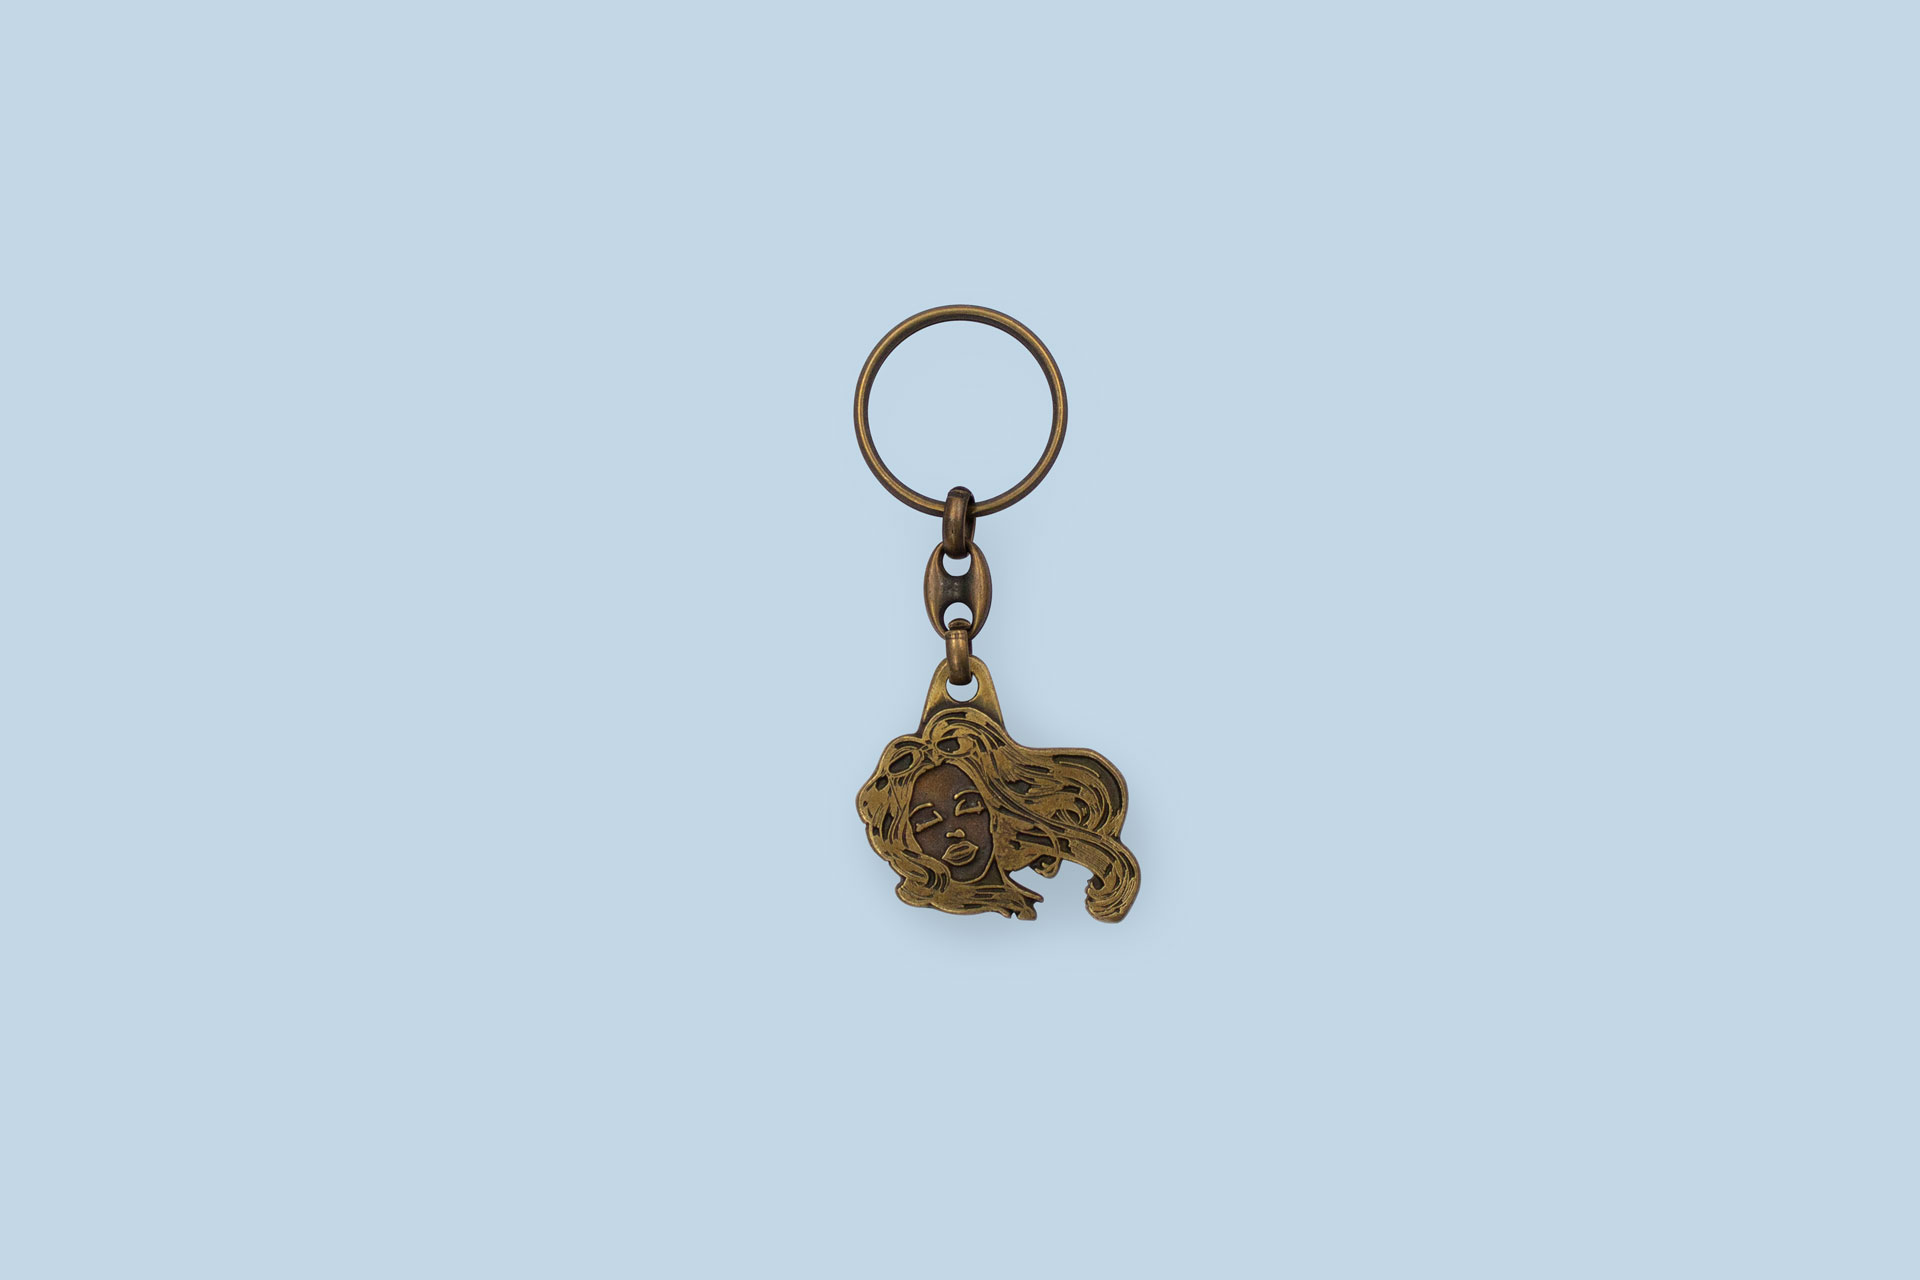 Brass-colored plated enamel Keychain